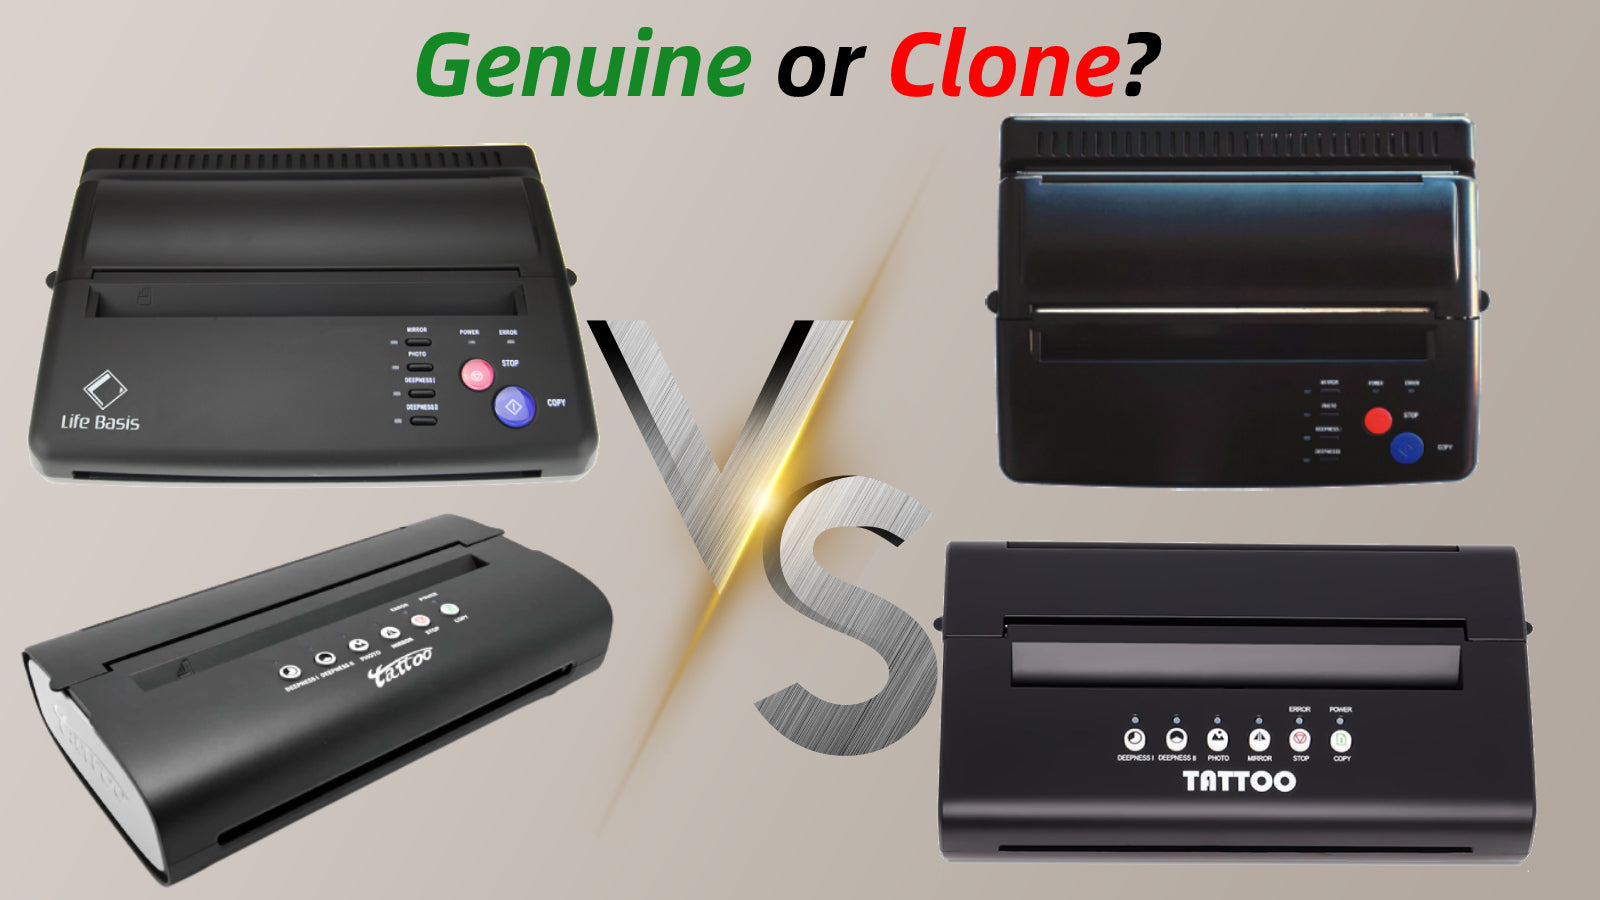 Thermal Tattoo Stencil Printer: How to Distinguish Genuine from Fake？